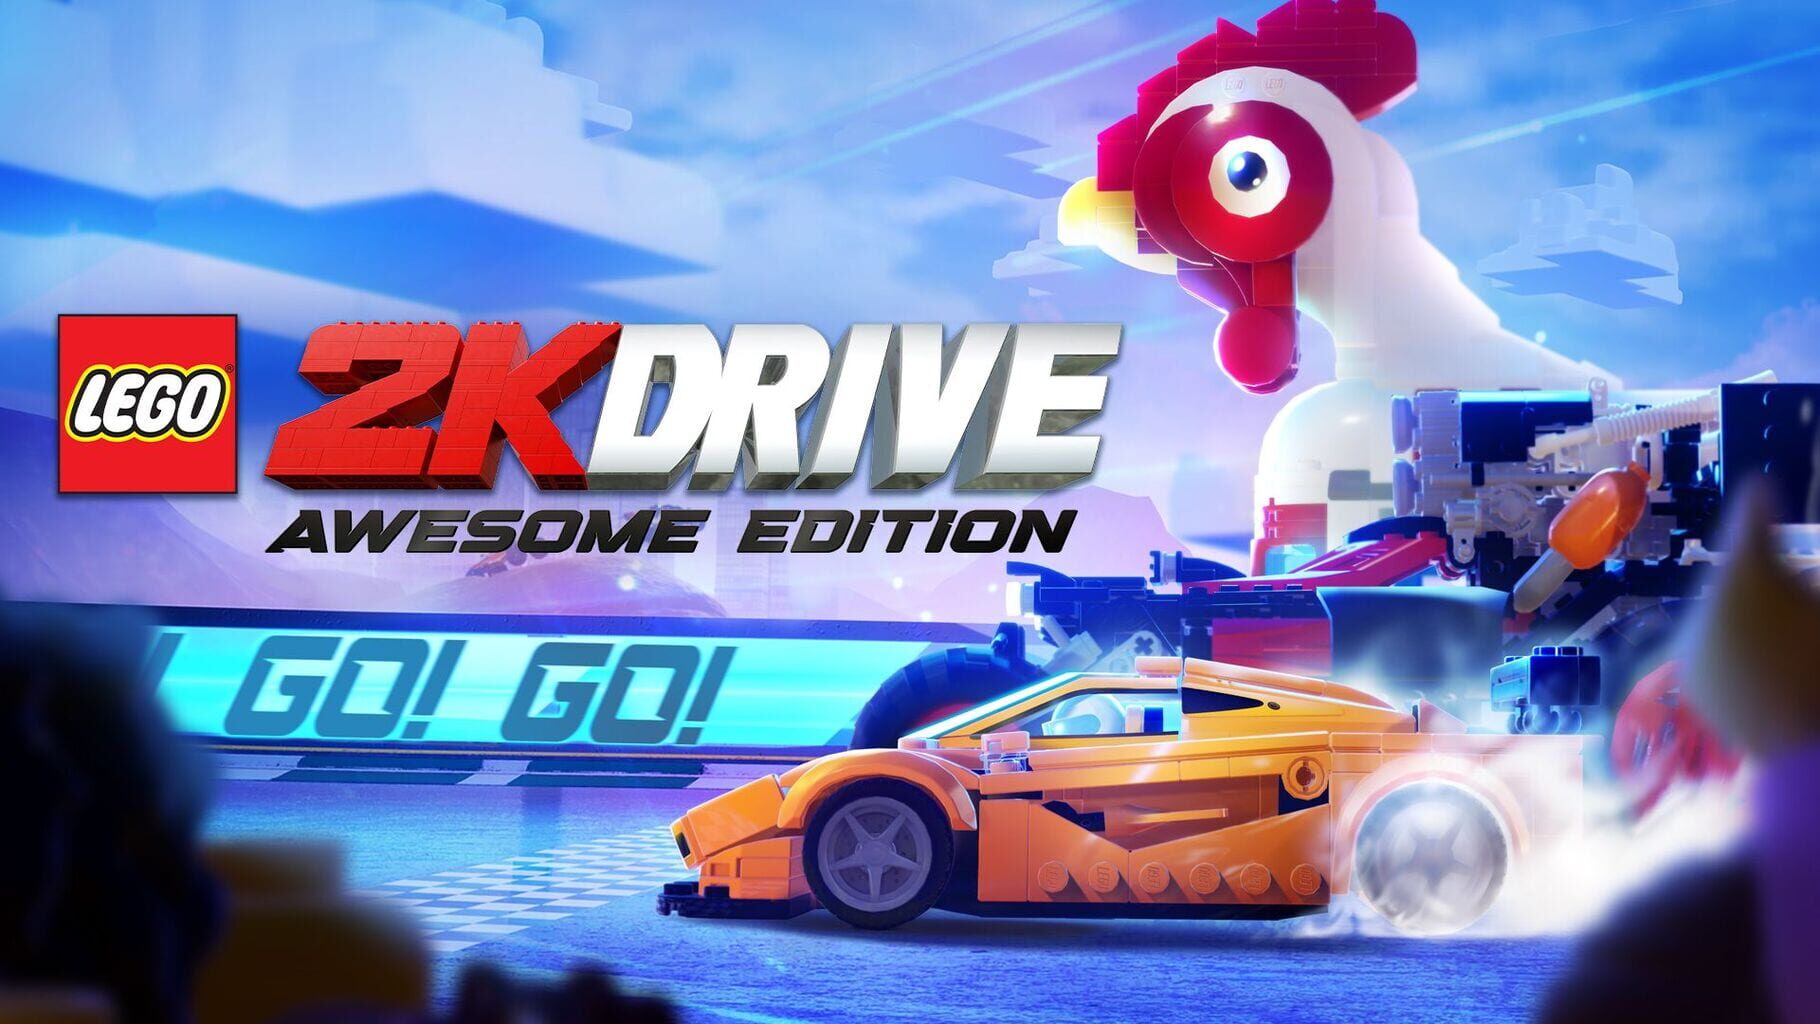 LEGO 2K Drive: Awesome Edition artwork